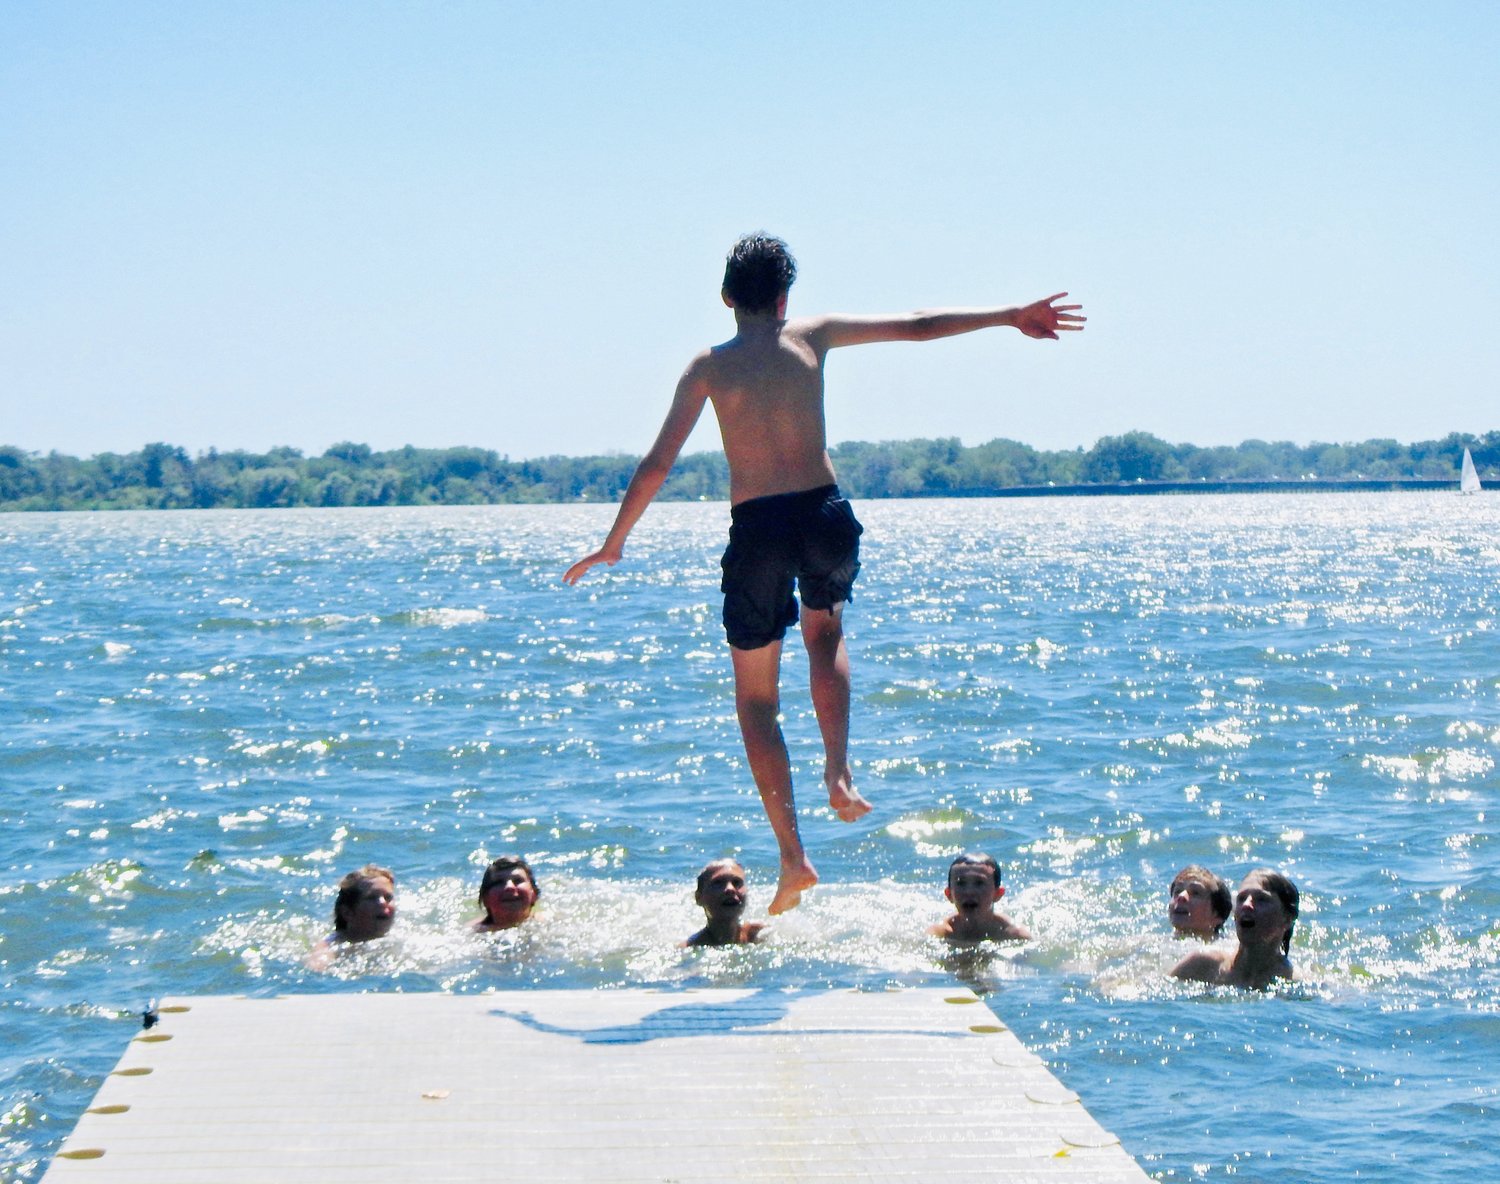 Kids cool off in Lake Nokomis on a sweltering hot day, capturing the joy of summertime in this reader submitted photo by Dallas Crow.